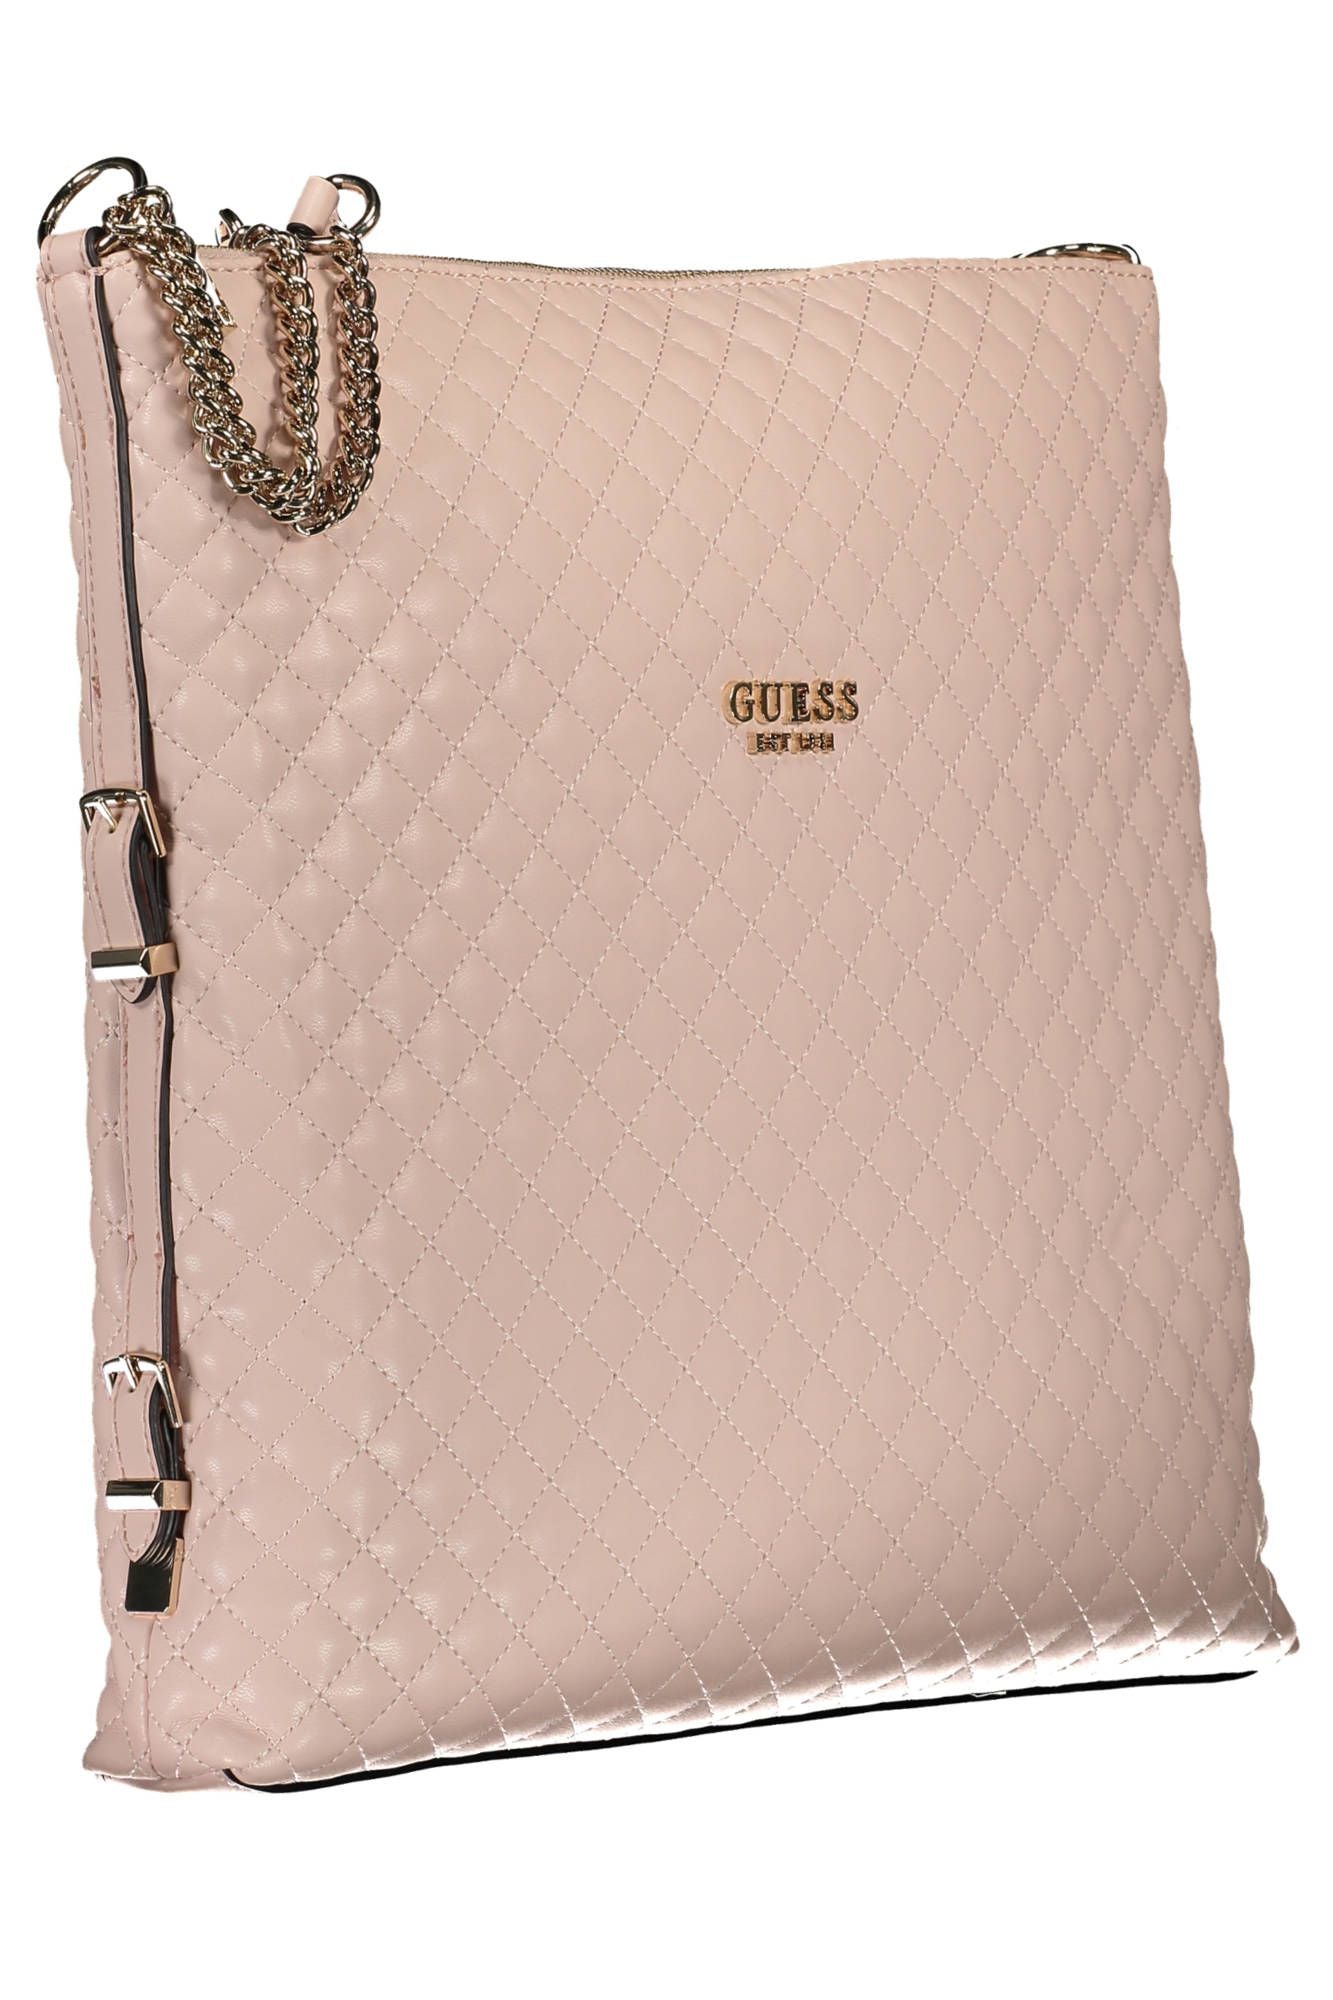 Guess Jeans Chic Pink Polyurethane Chain-Handle Shoulder Bag